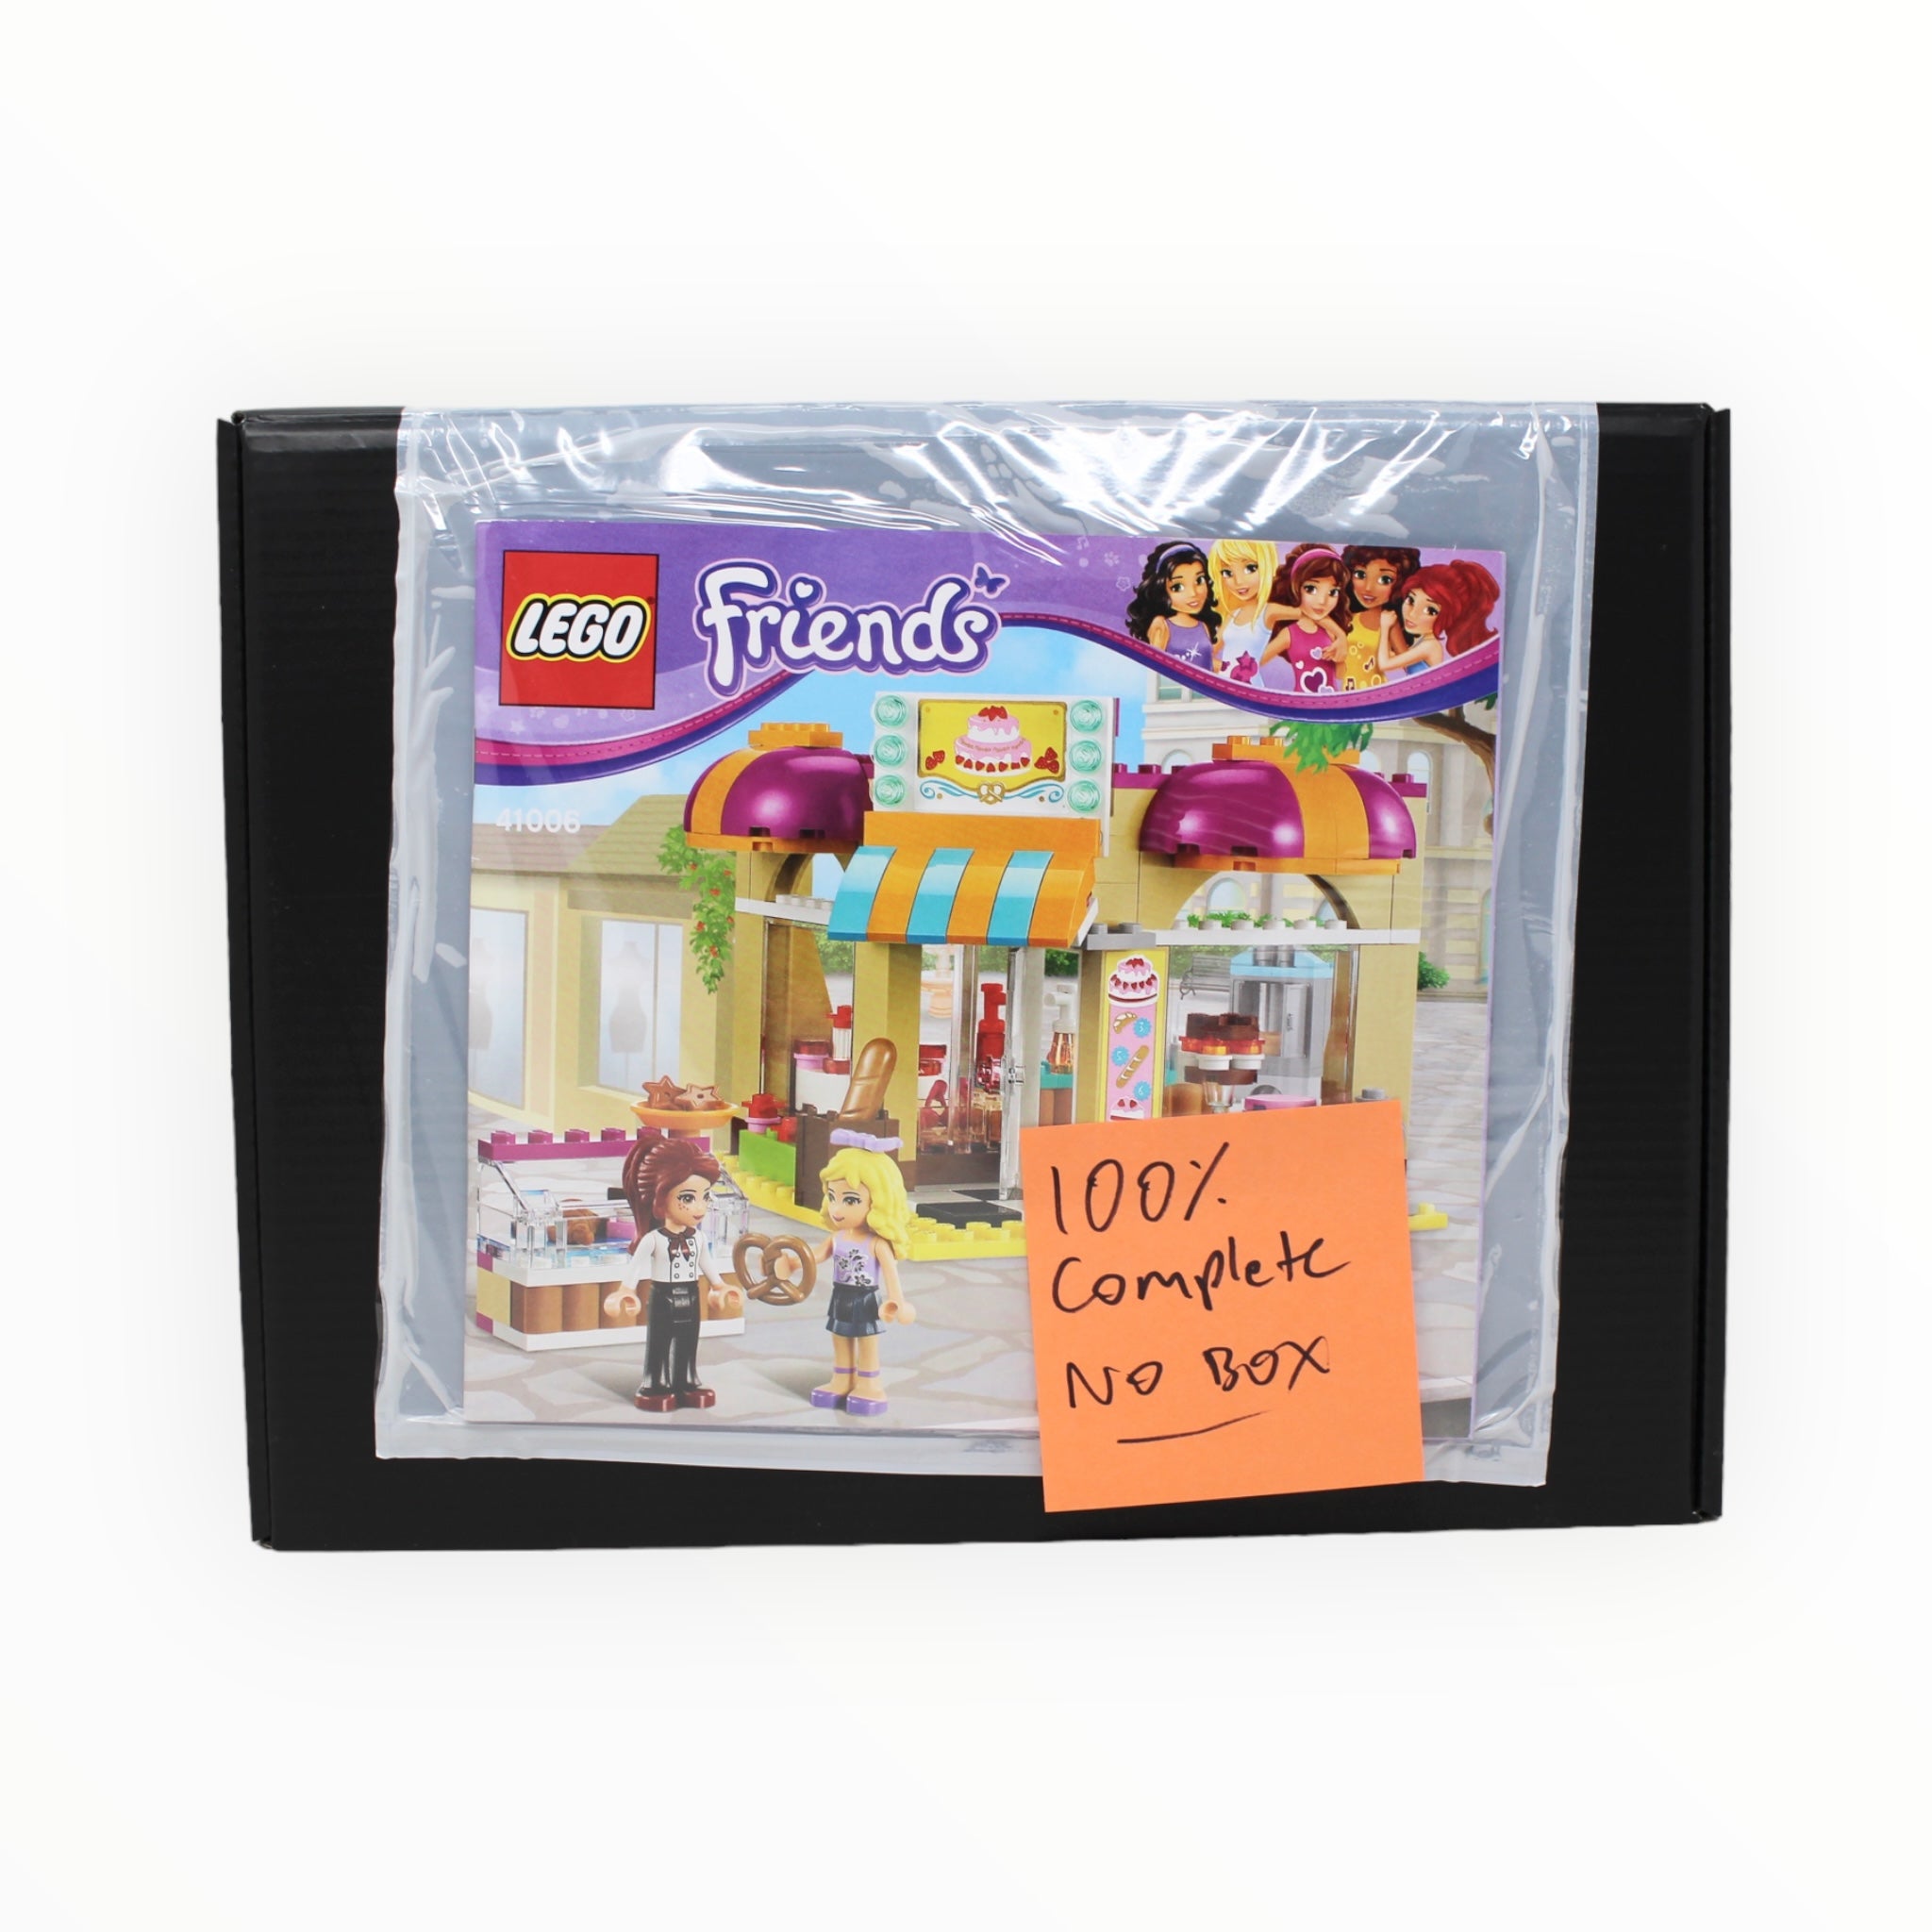 Certified Used Set 41006 Friends Downtown Bakery (no box)